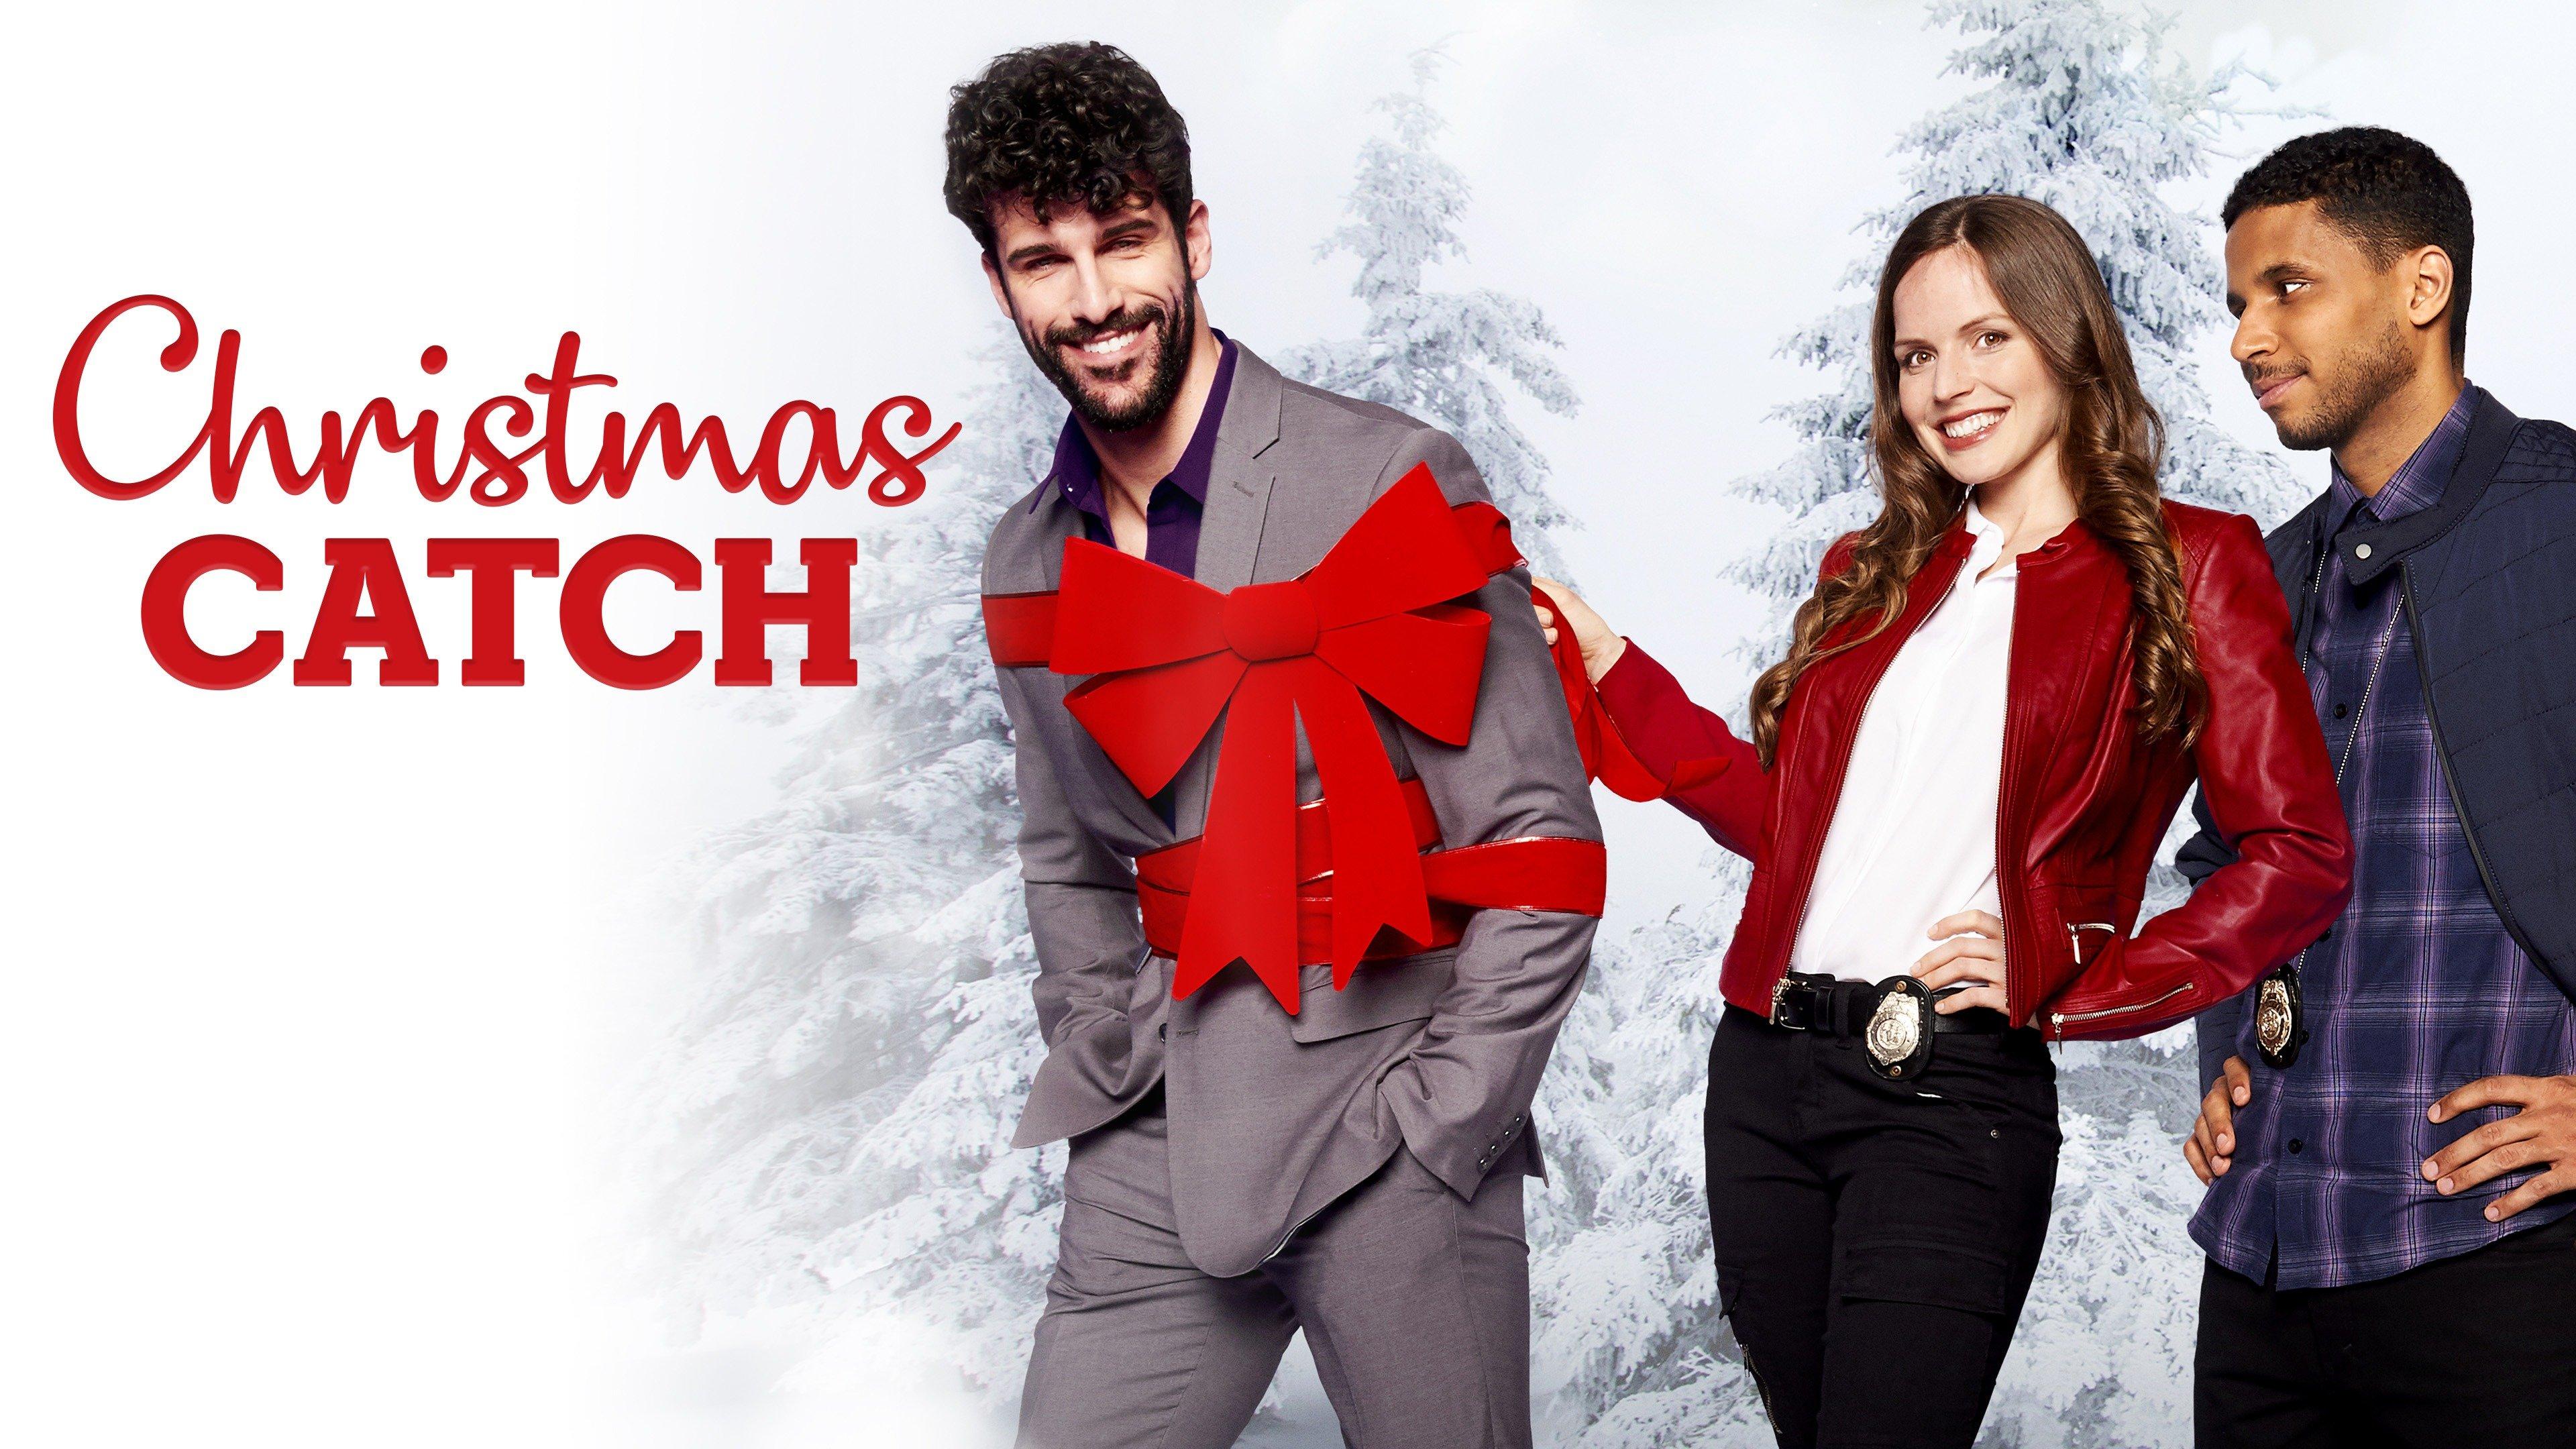 Watch Christmas Catch Streaming Online on Philo (Free Trial)